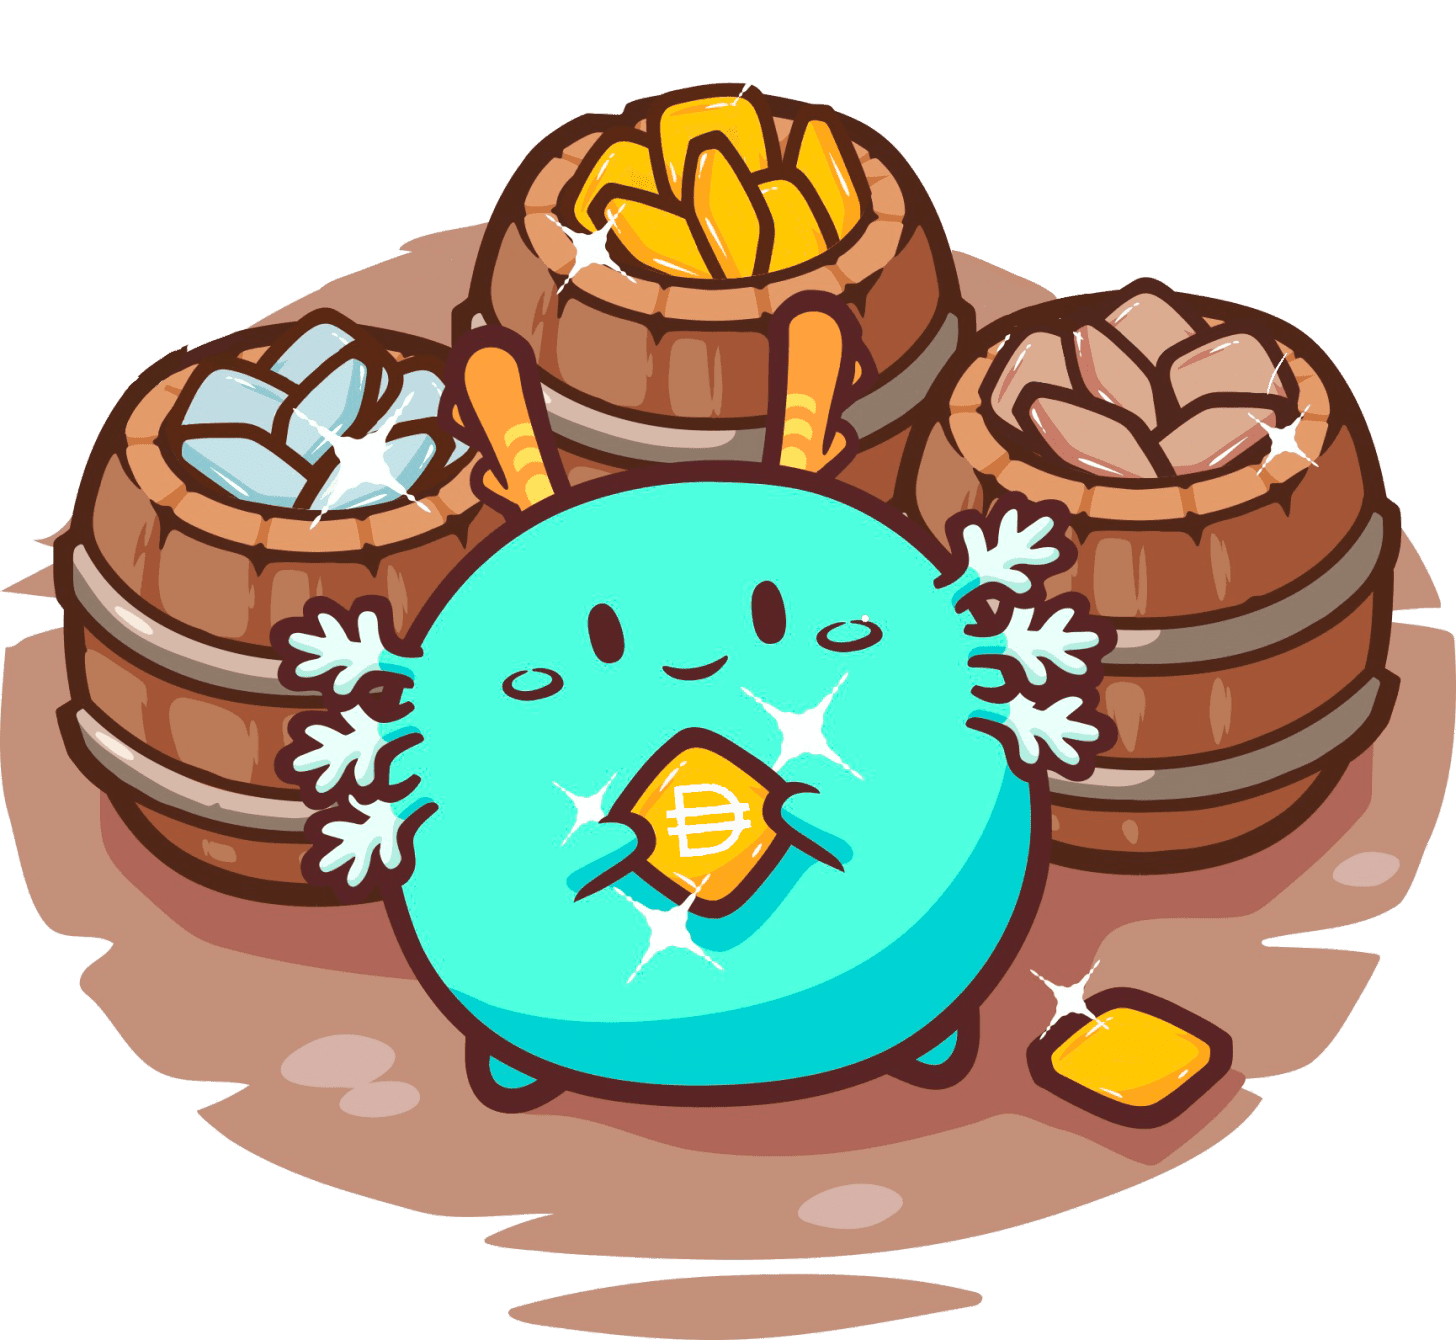 Download Axie Infinity APK on your Android device and start earning money from it